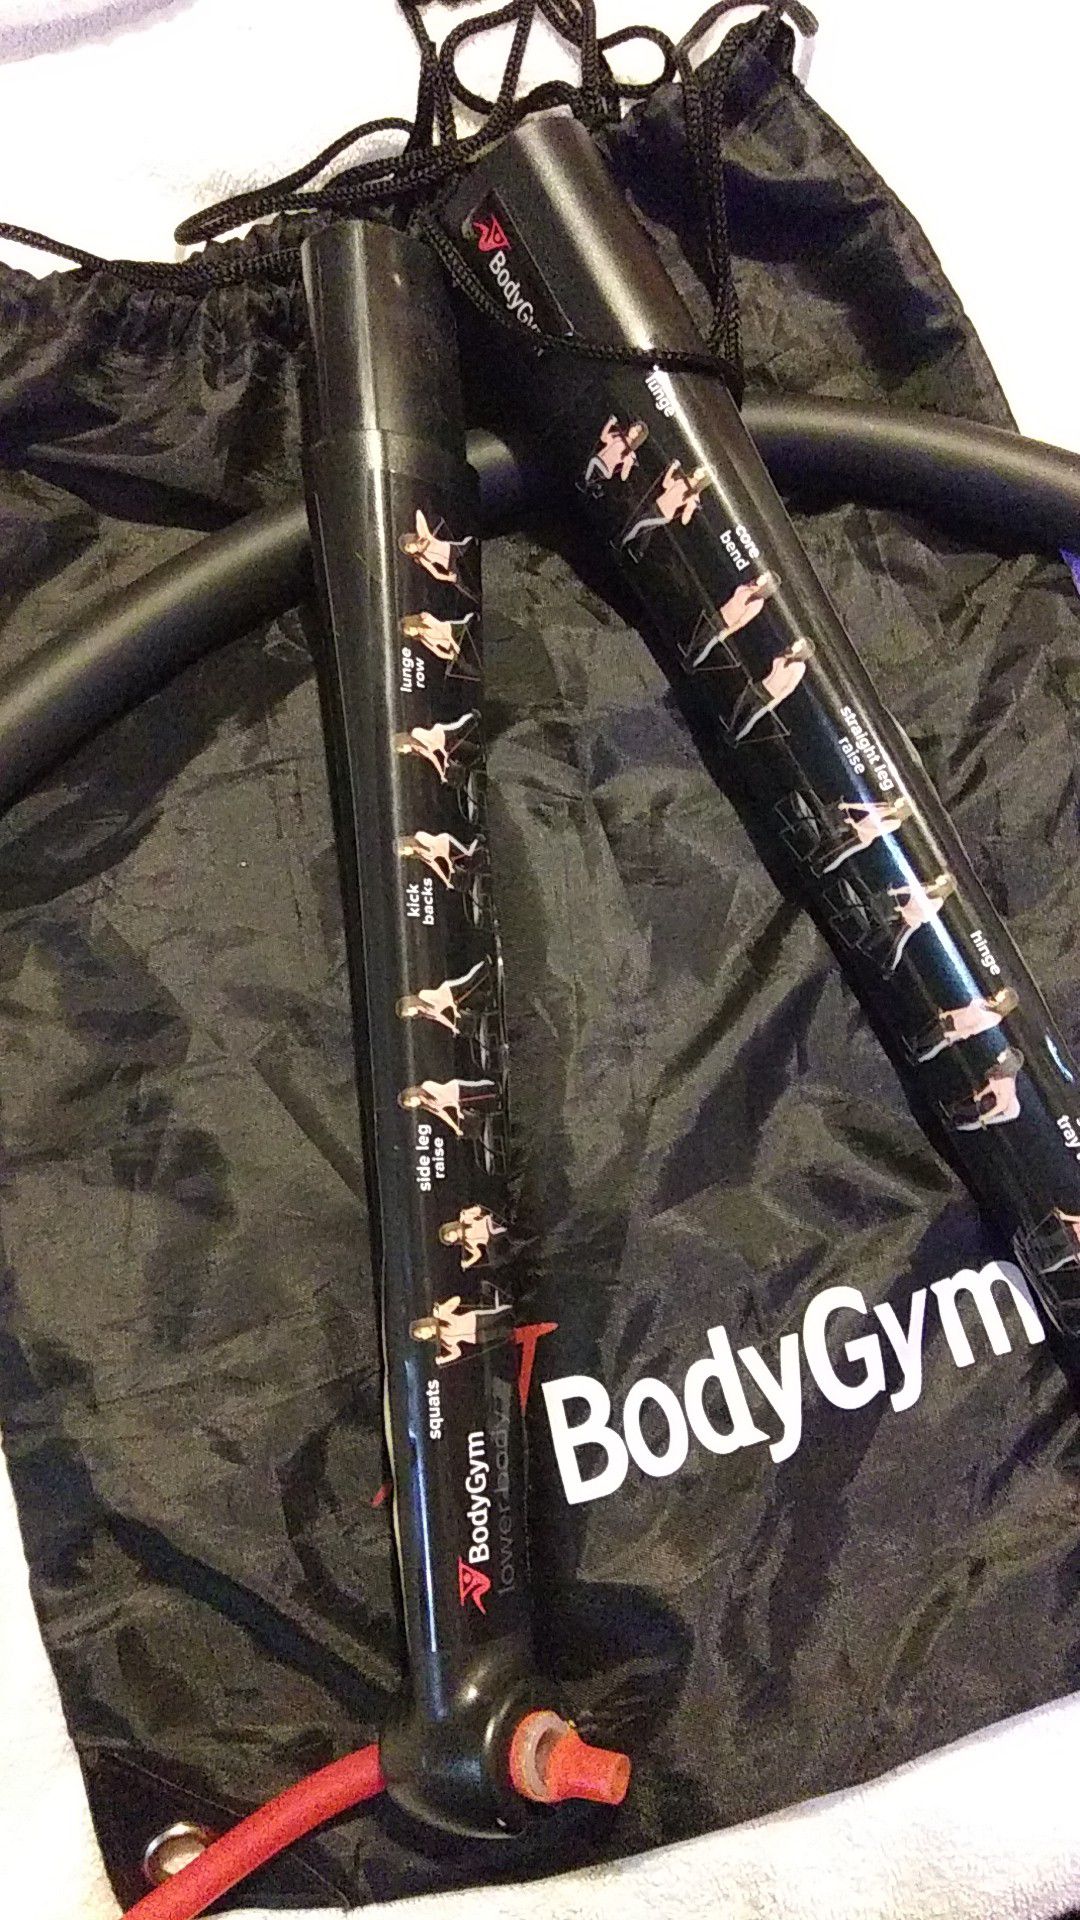 Body gym resistance band and carrying bag